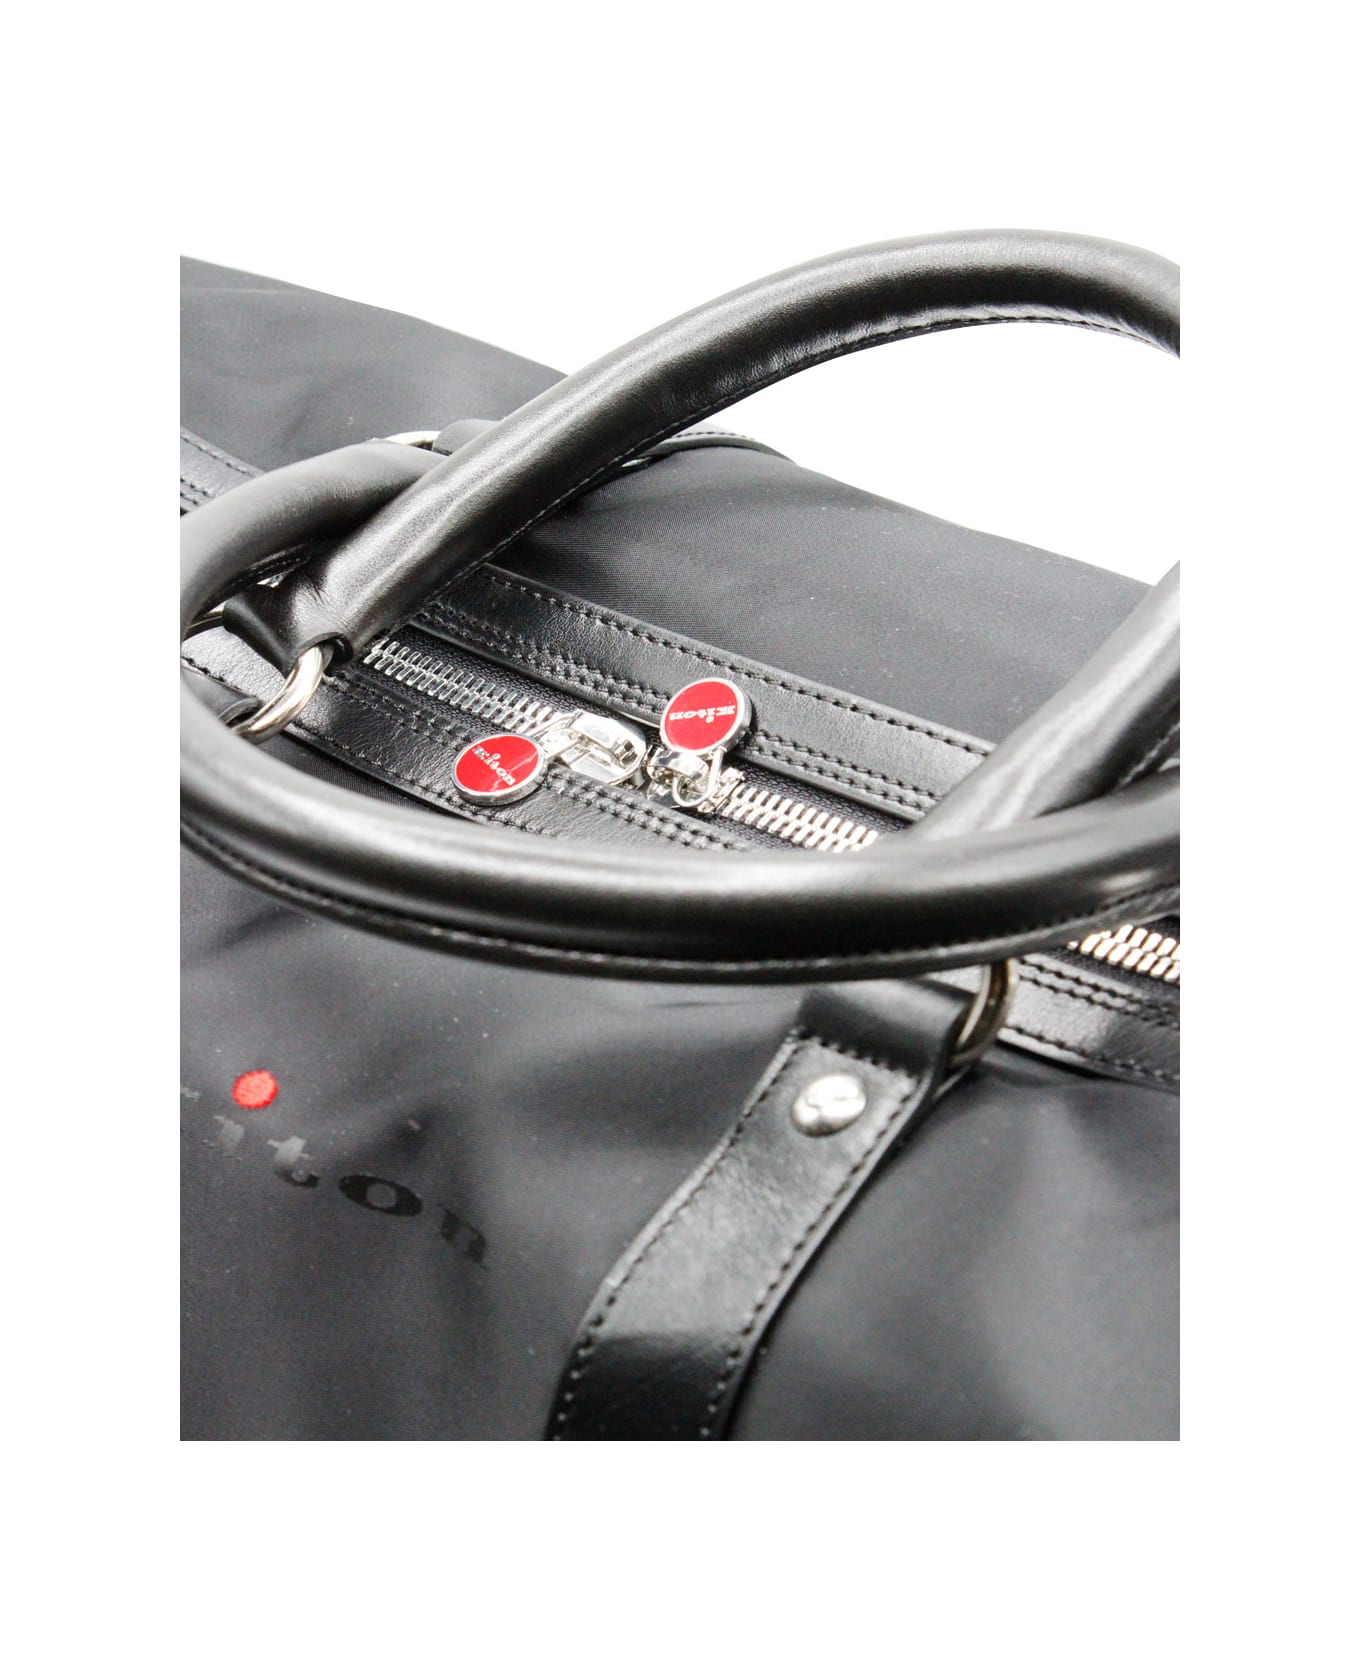 Kiton dark Bag In Technical Fabric With Leather Inserts And Logo, Shoulder Strap Supplied 52 X 30 X 125 Cm - Black